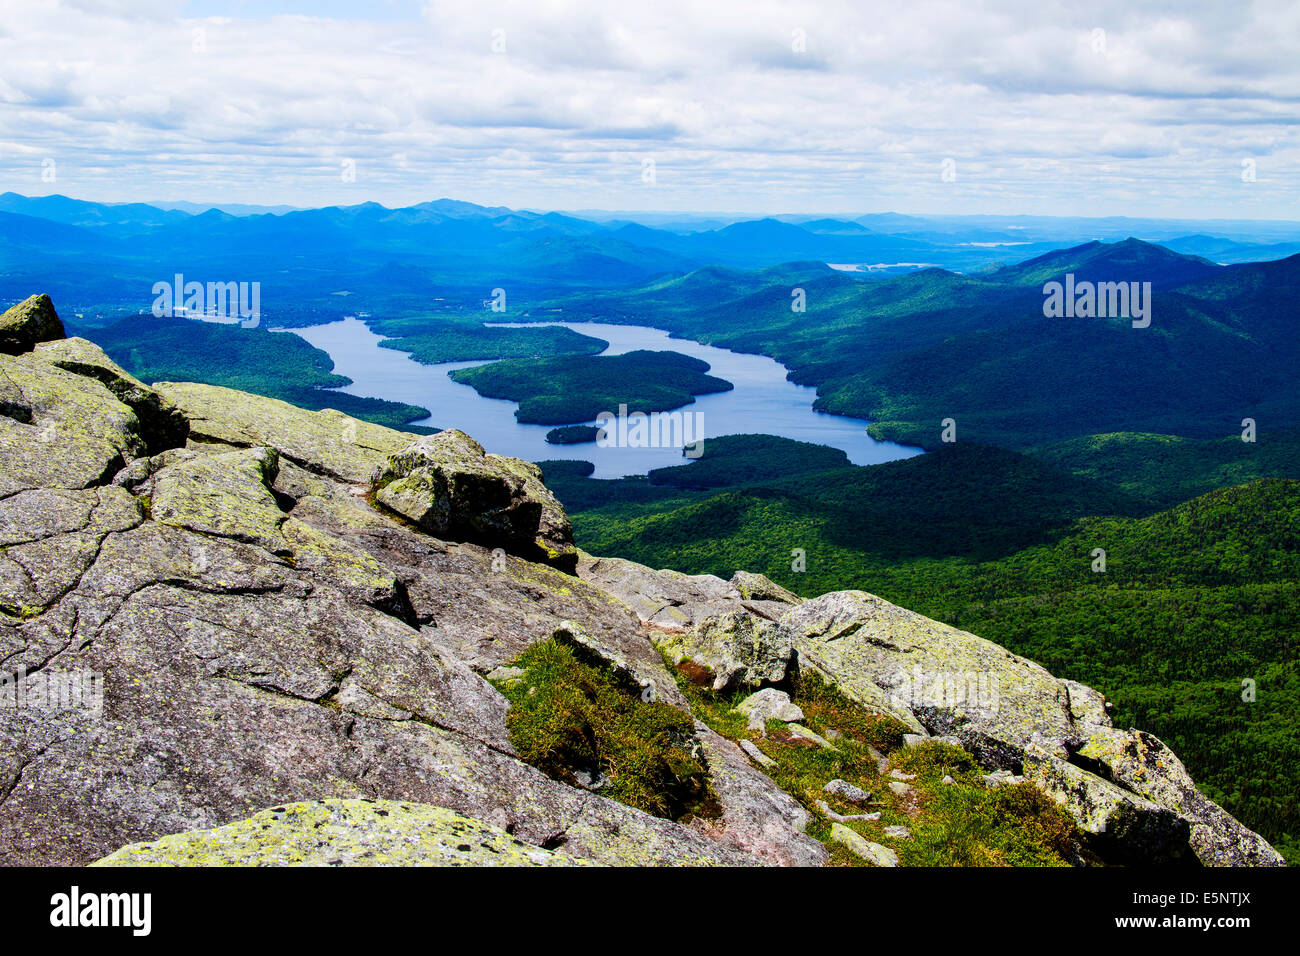 Lake Placid New York USA. Adirondack State Park View from Whiteface Mountain of Lake Placid Stock Photo